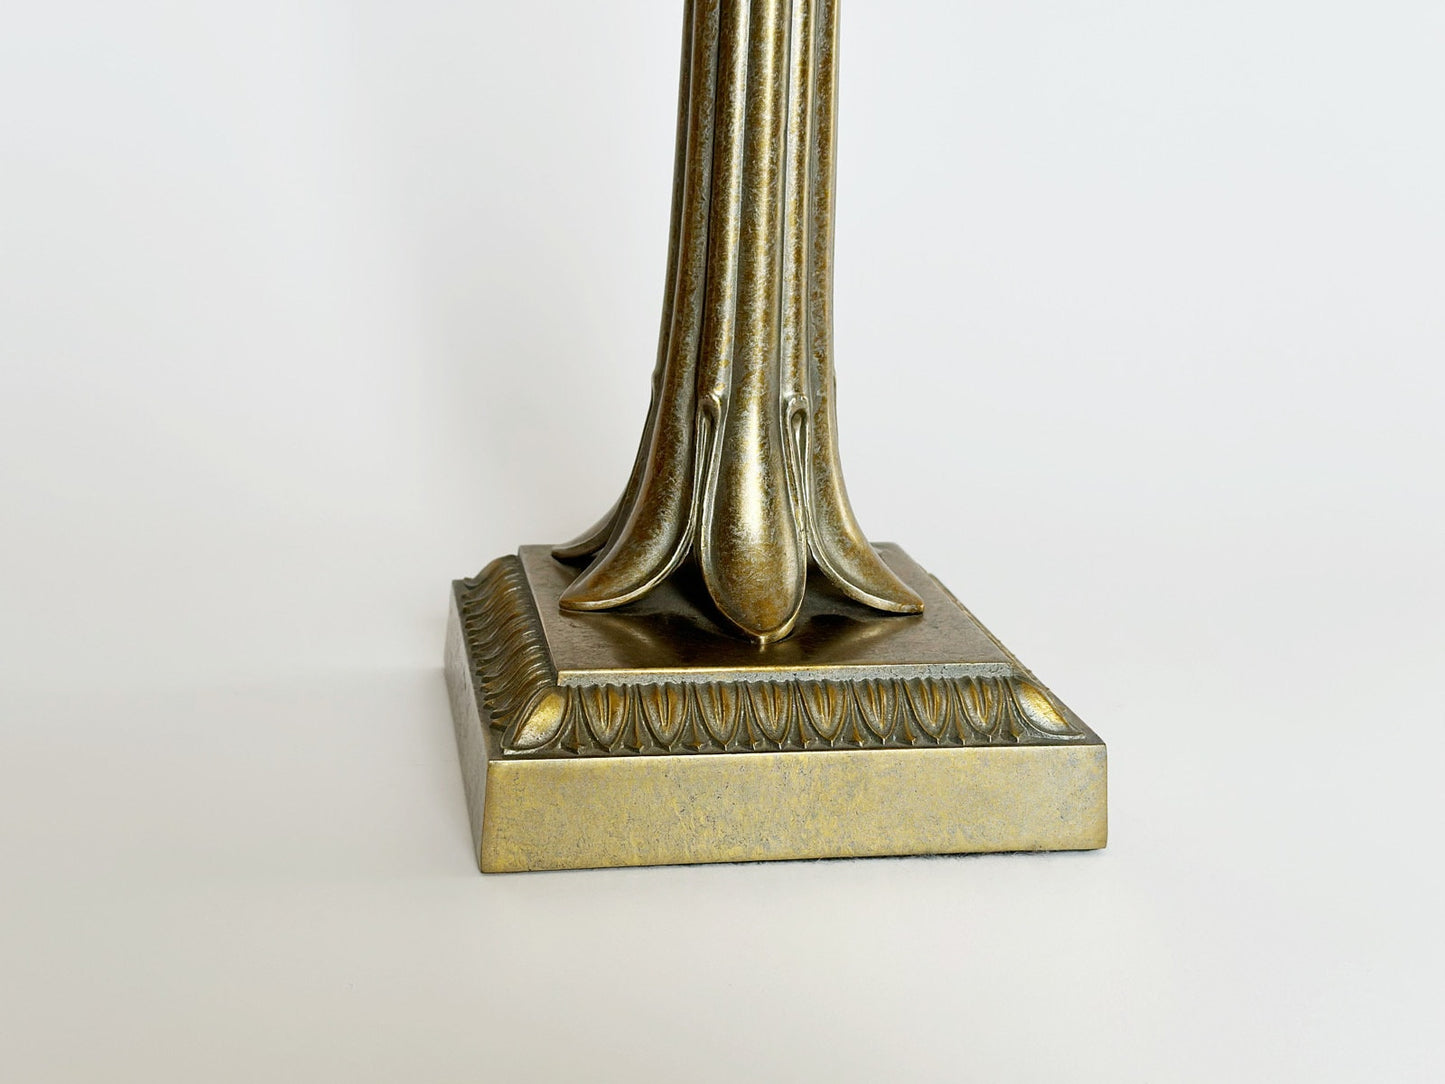 The square base of the vintage designer Frederick Cooper brass table lamp features a leaf like design.